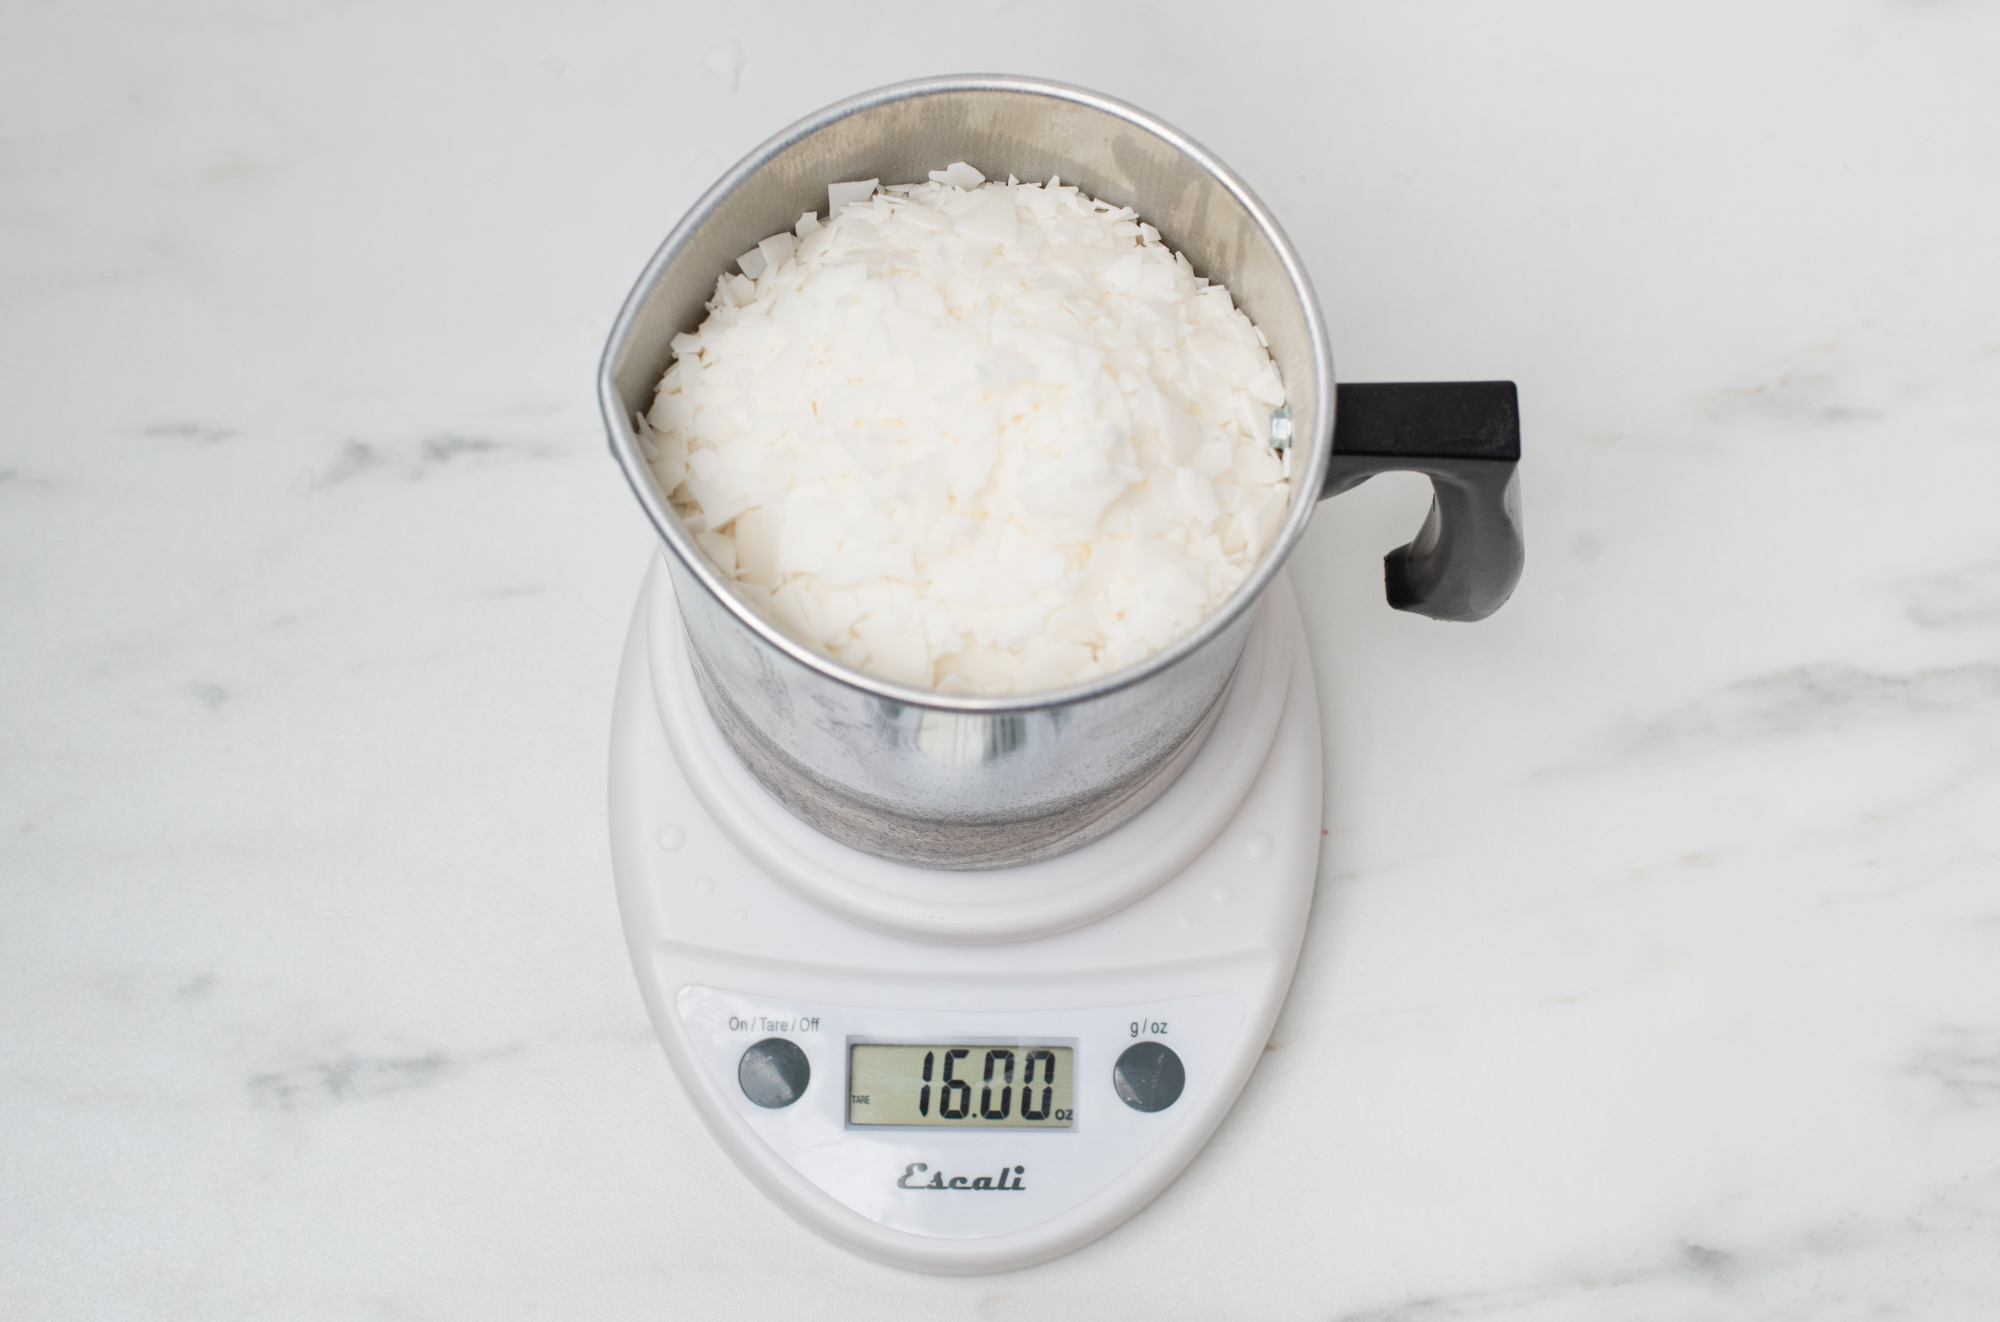 Wax flakes weighed on a digital scale.